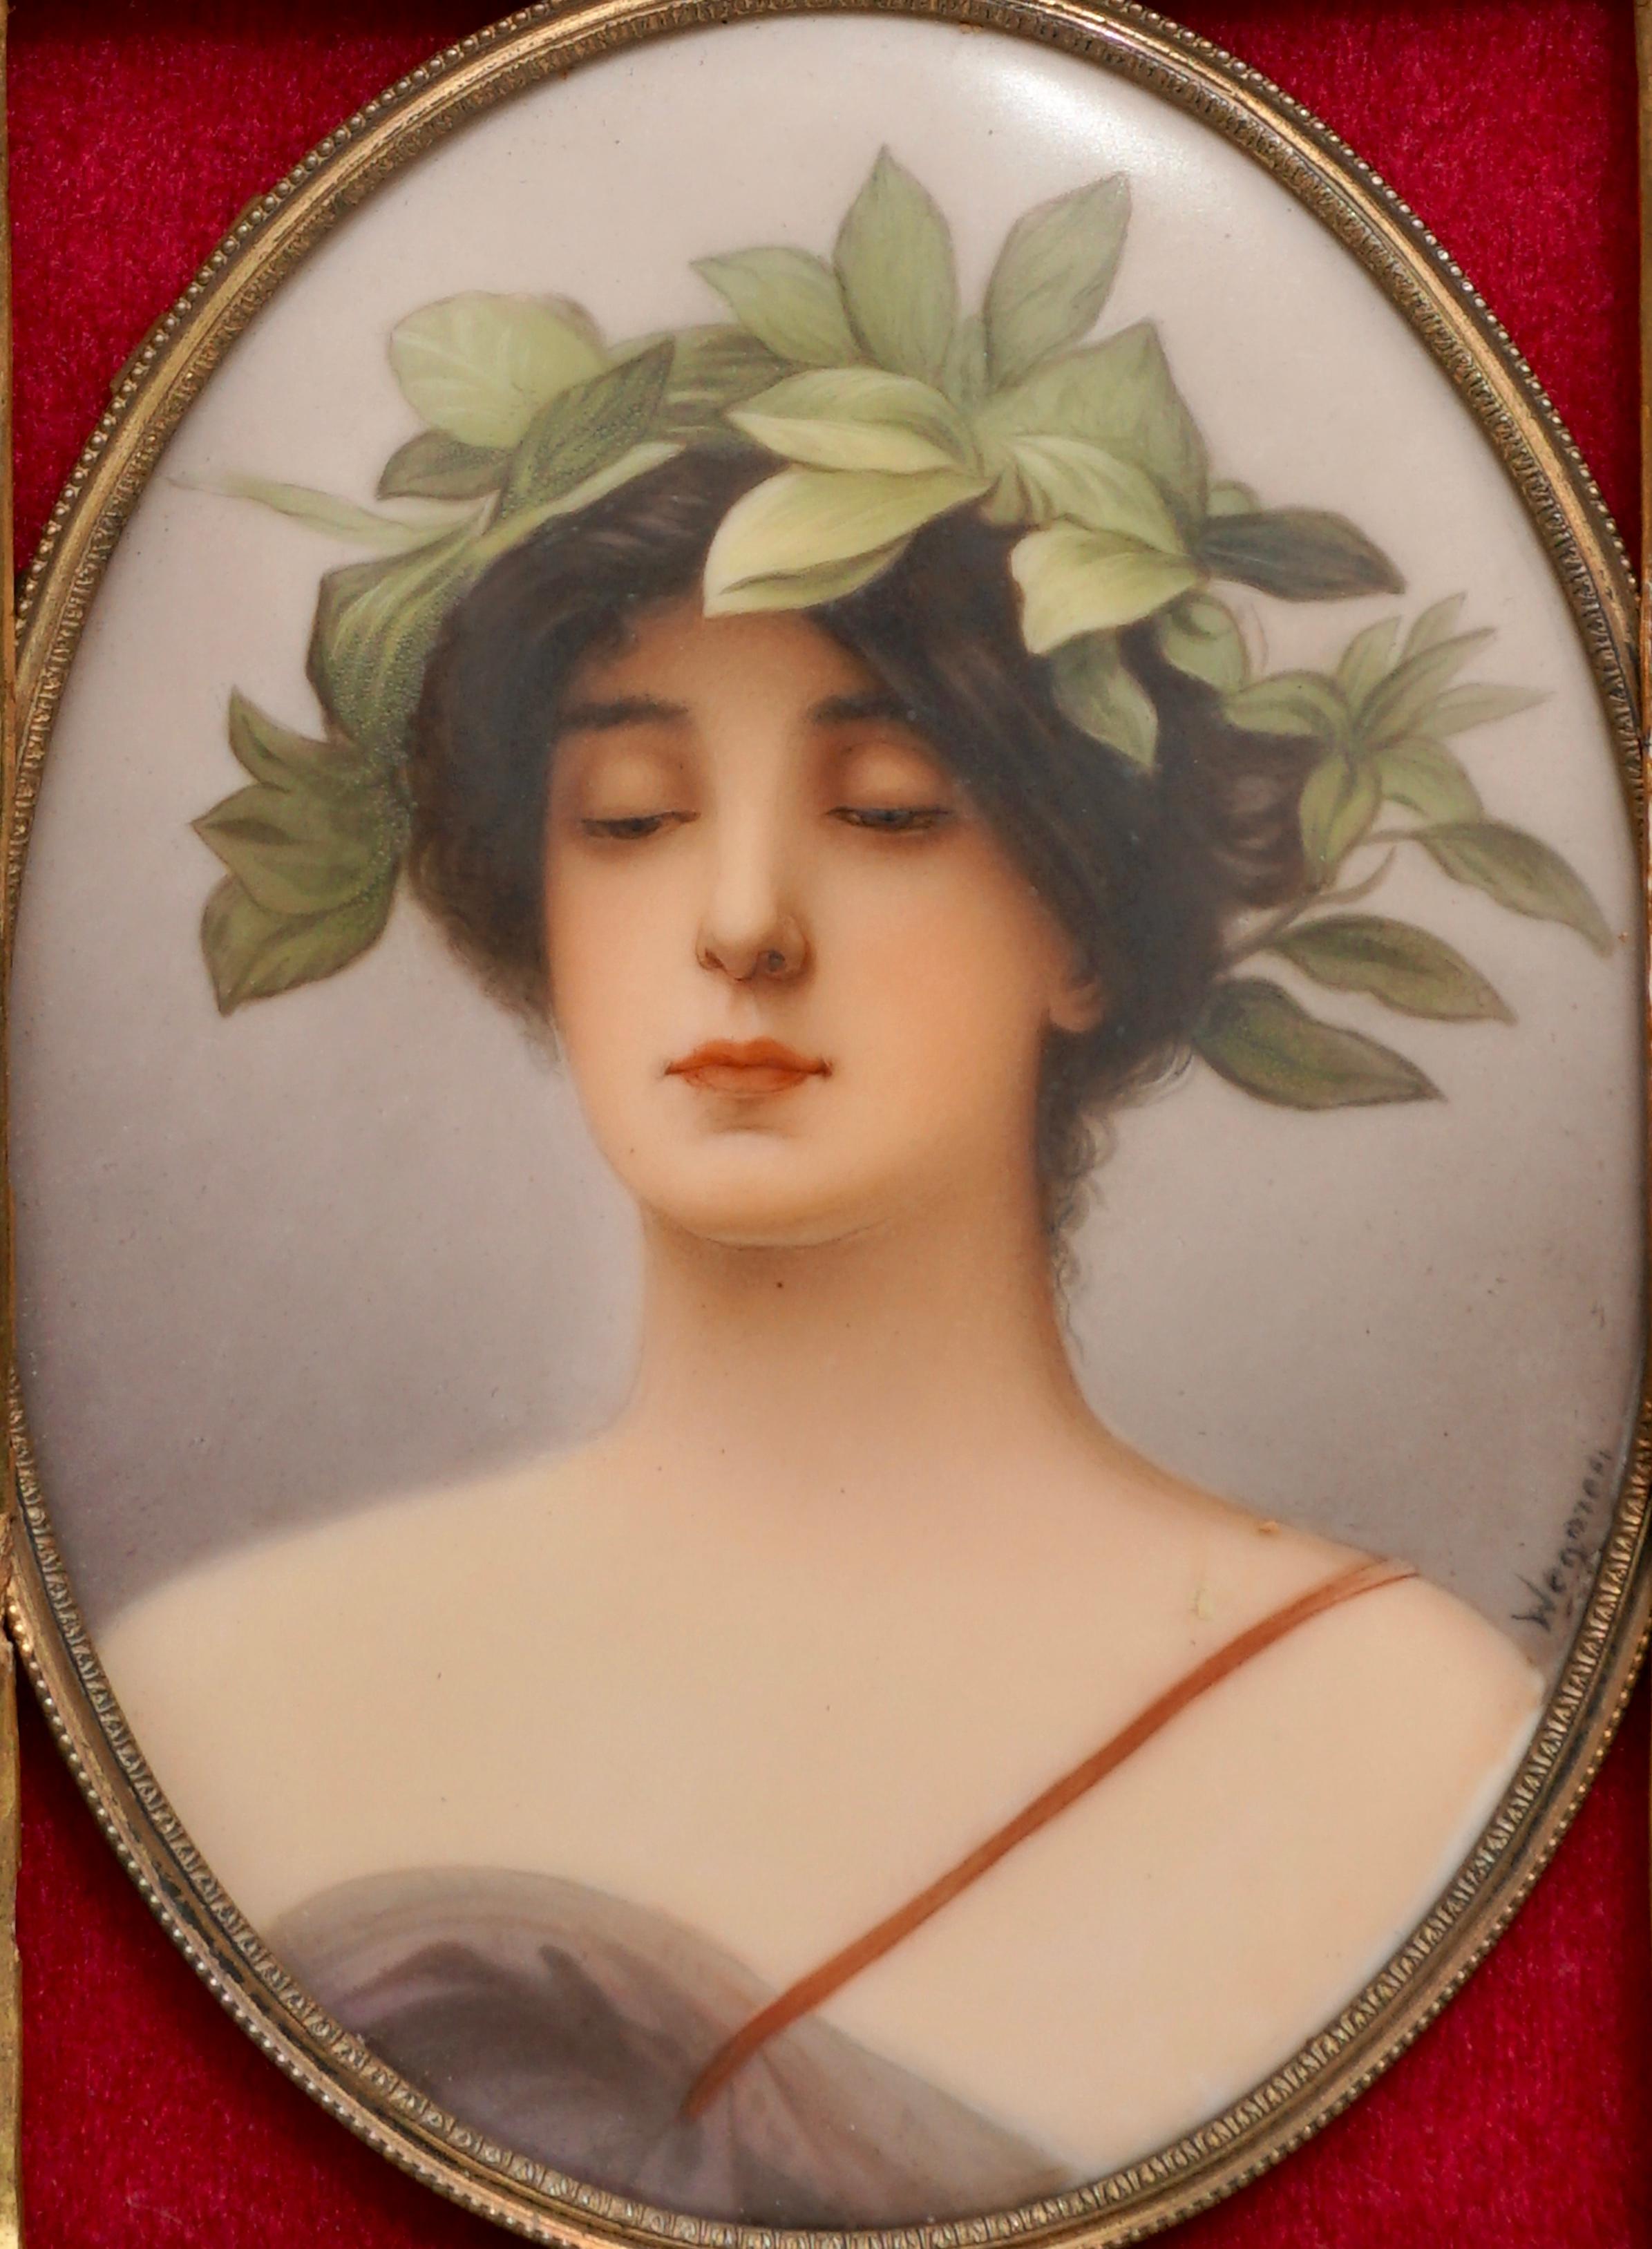 Shoulder length portrait of young lady in classical gown with laurel leaf wreath in hair.
Manufacturer: C.M. Hutschenreuther
signed lower right “Wagner” 
Stamped on back “12” over circle with “CR” with painted titled “Daphne”
 
Oval Porcelain